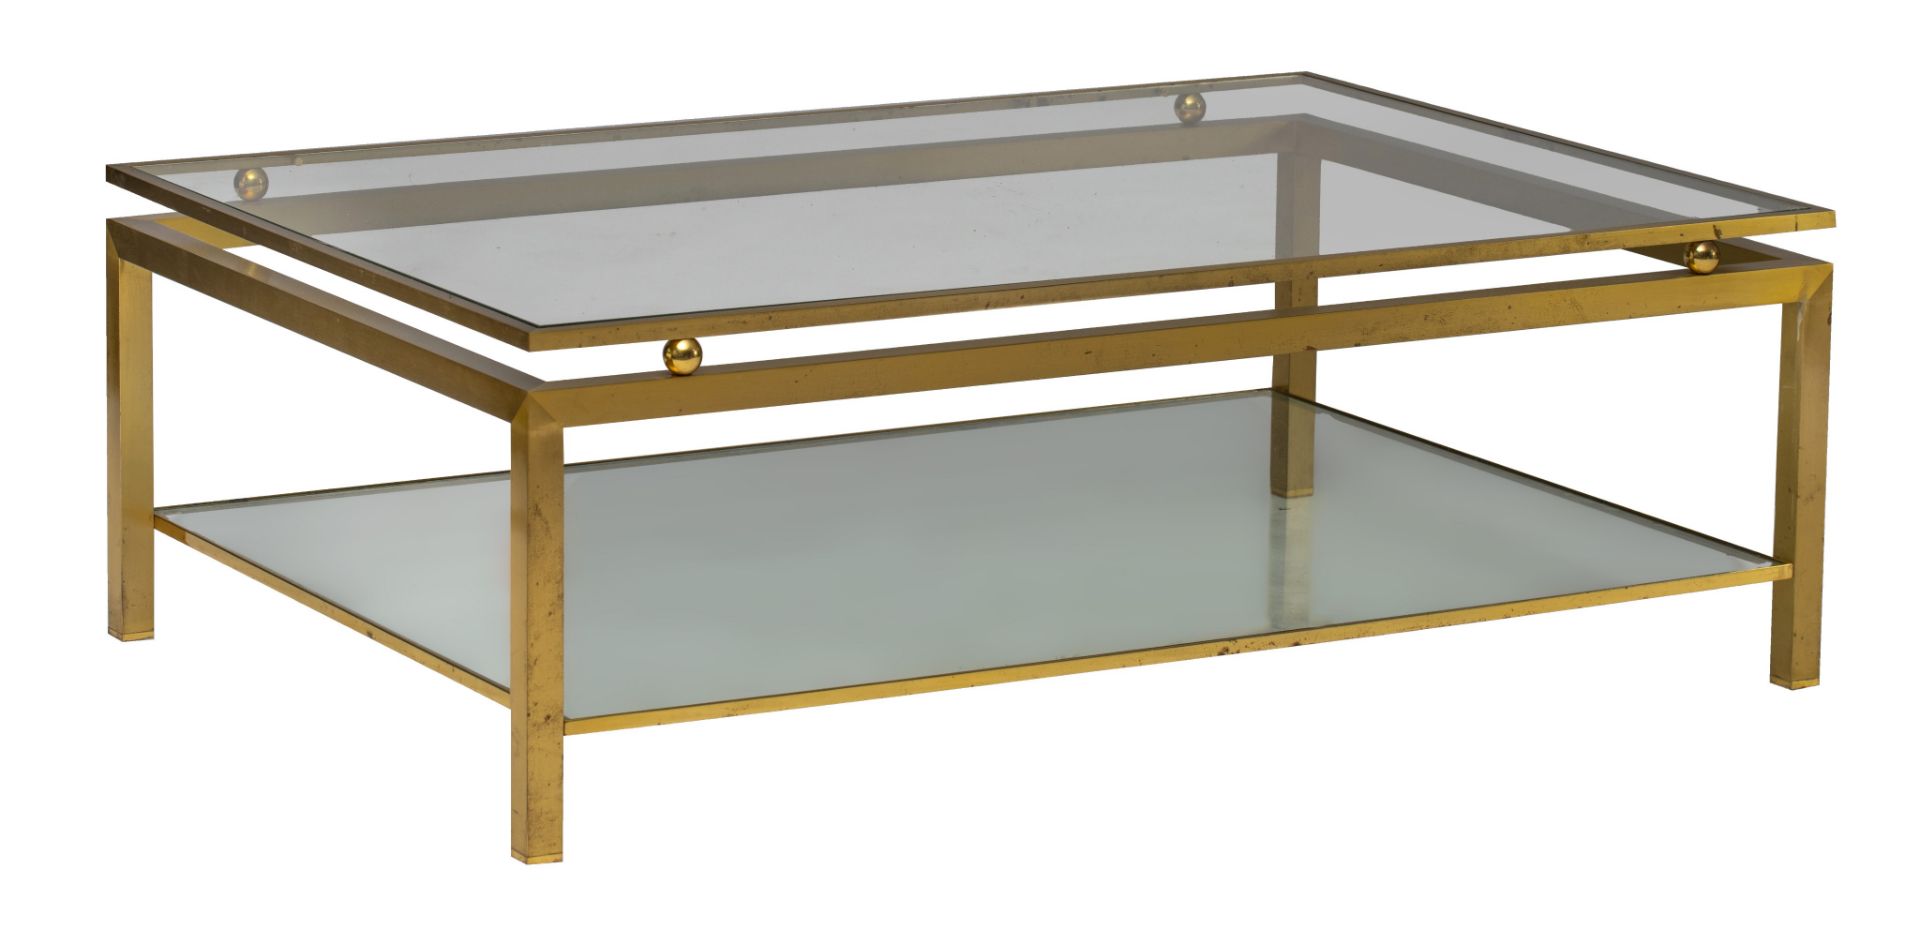 A vintage polished brass and glass coffee table by Maison Jansen, H 40 - W 120 - D 80 cm